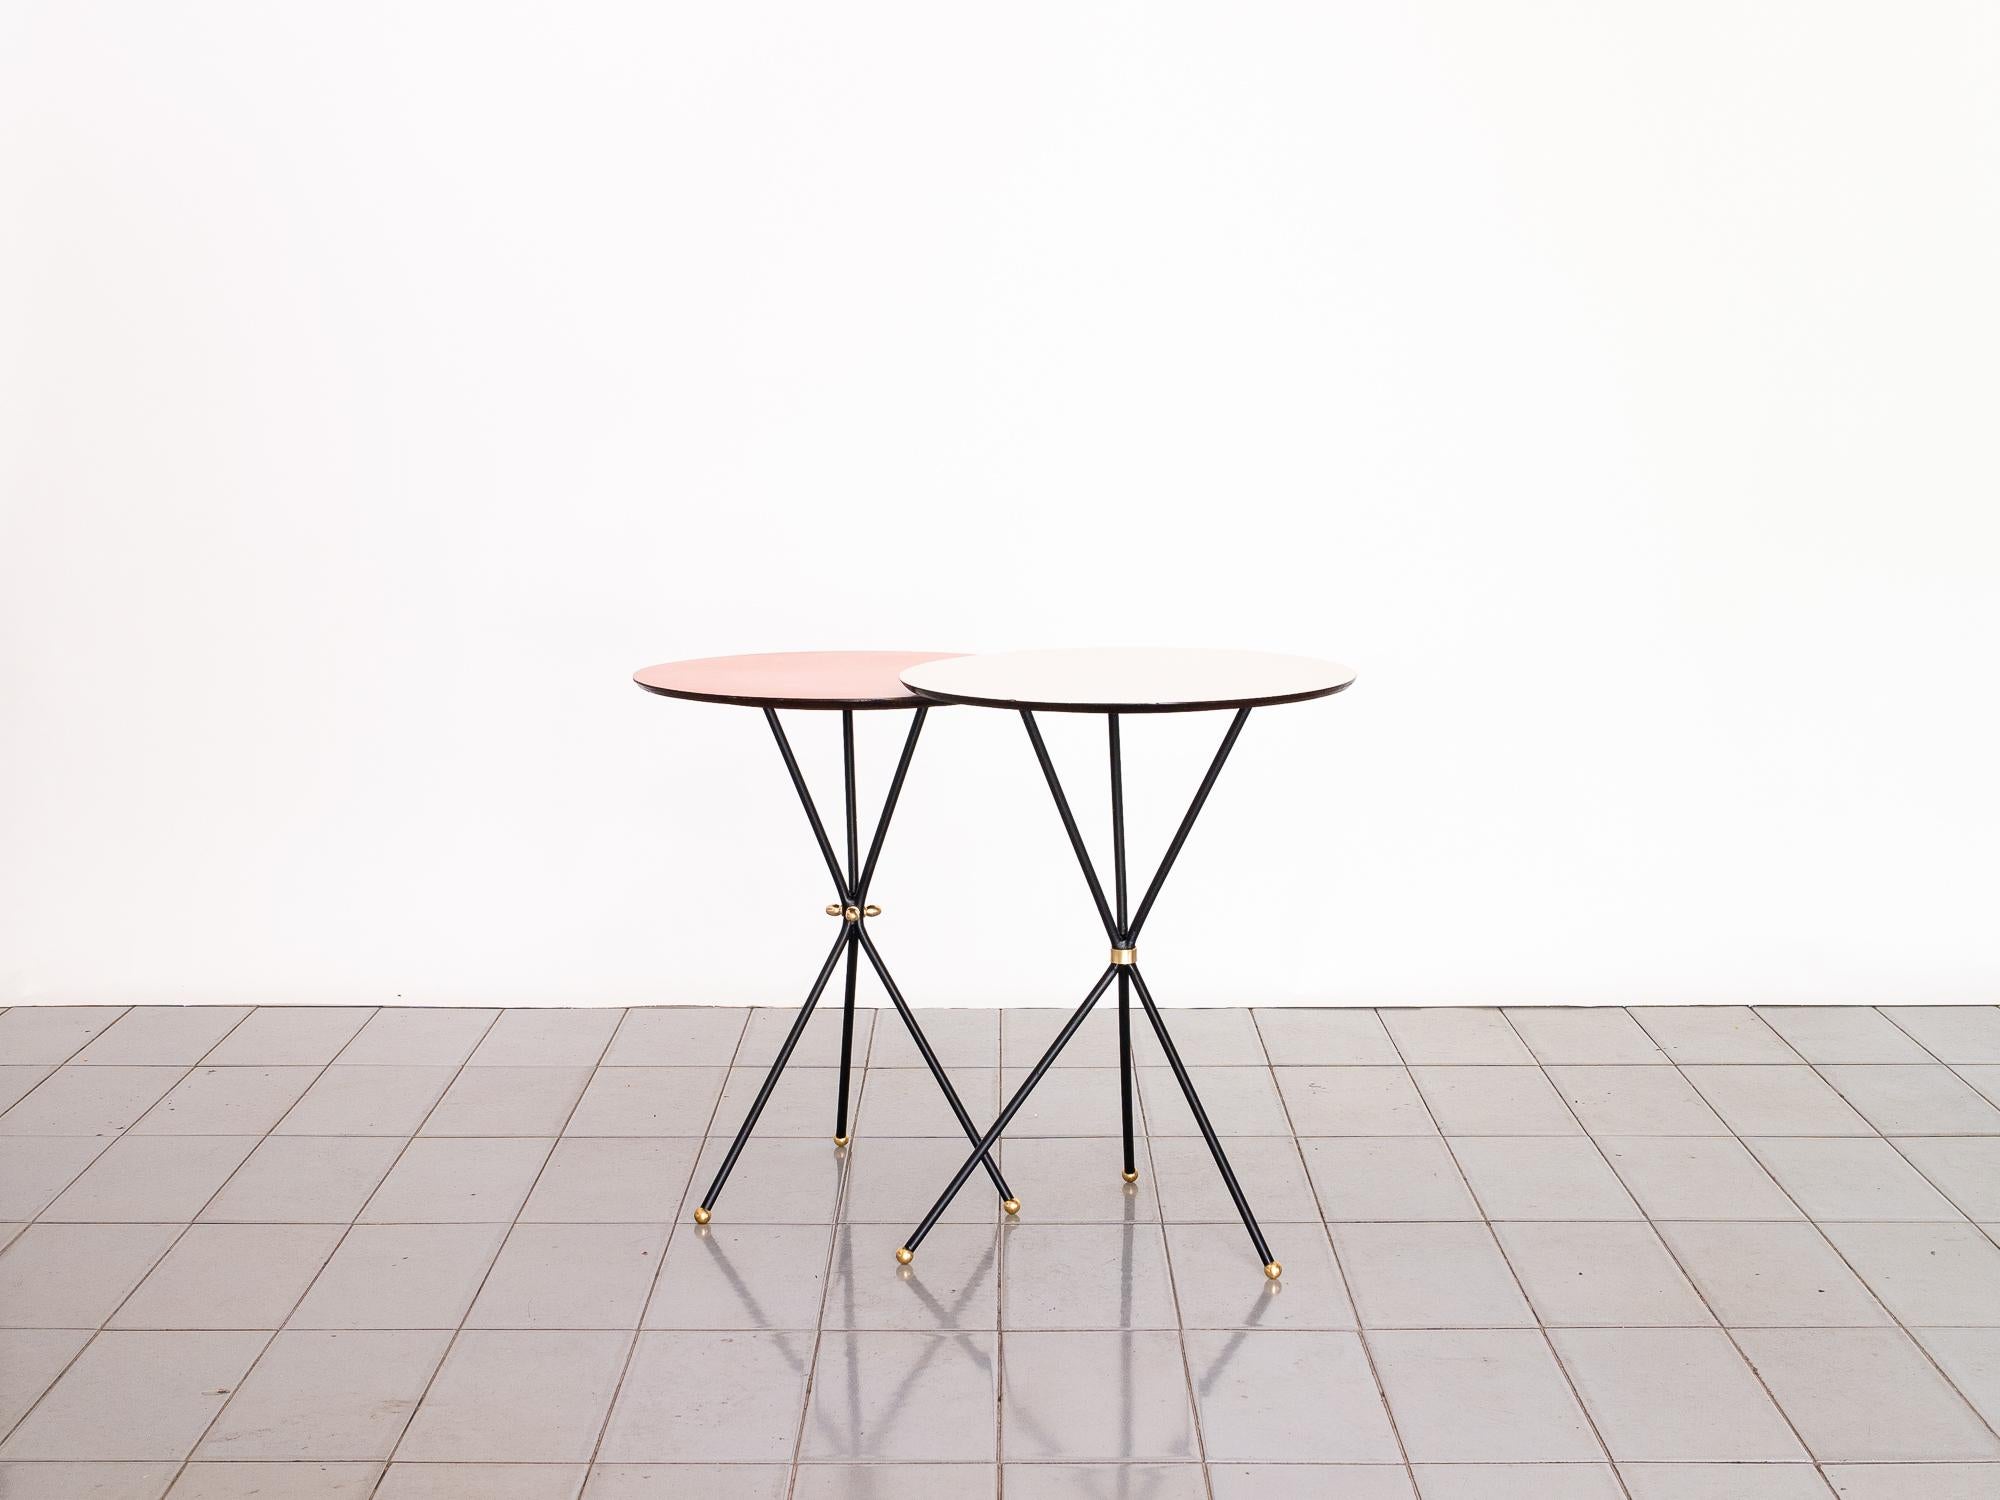 Mid-Century Modern 1950s Duo of Tripod Side Tables in Iron, Brass and Formica, Brazil Modern